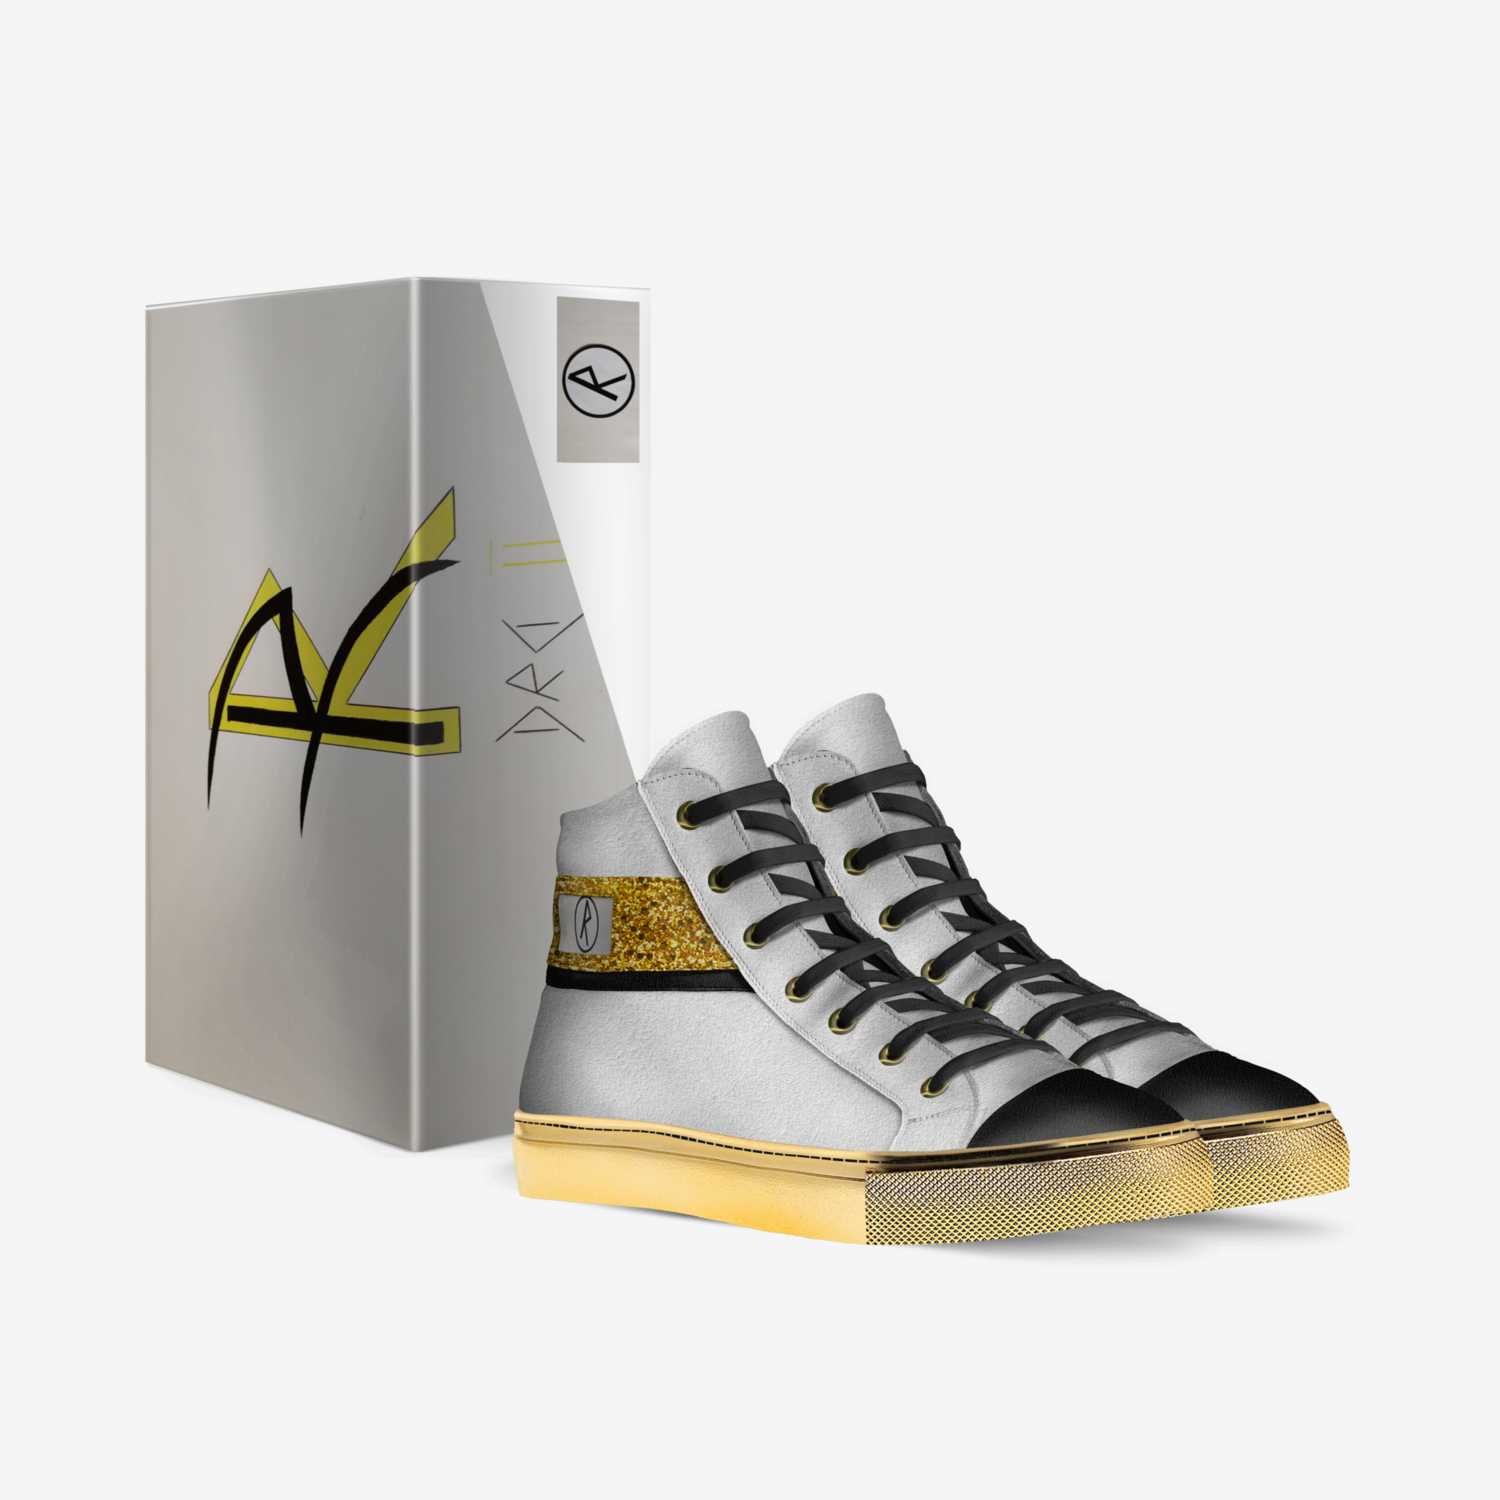 DRD ll custom made in Italy shoes by Marcel Rabič | Box view